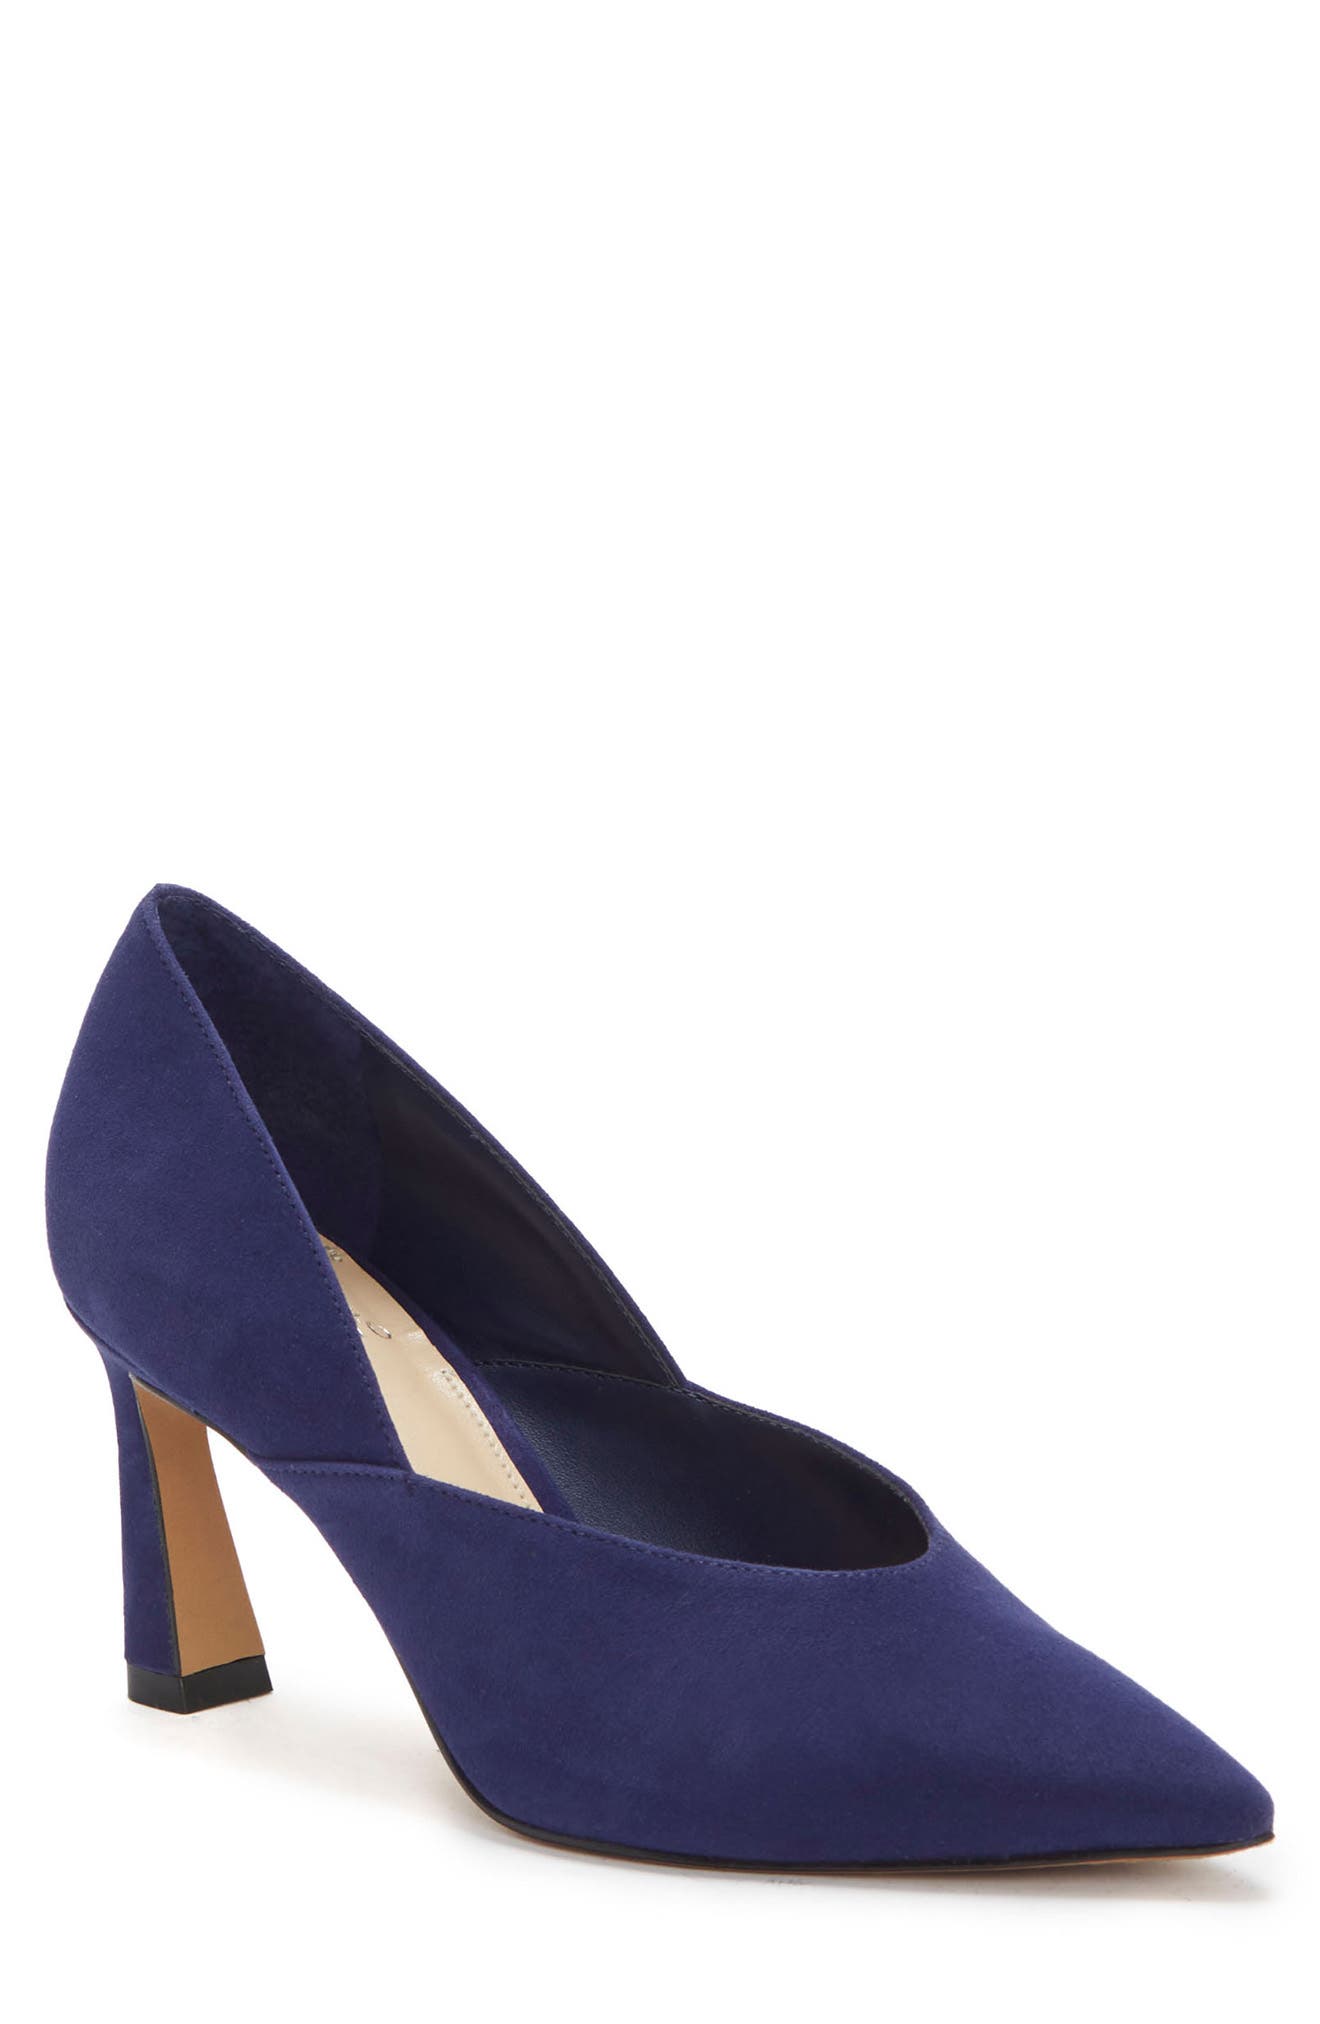 UPC 191707307438 product image for Vince Camuto Kastani Pointed Toe Pump in New Navy at Nordstrom, Size 9 | upcitemdb.com